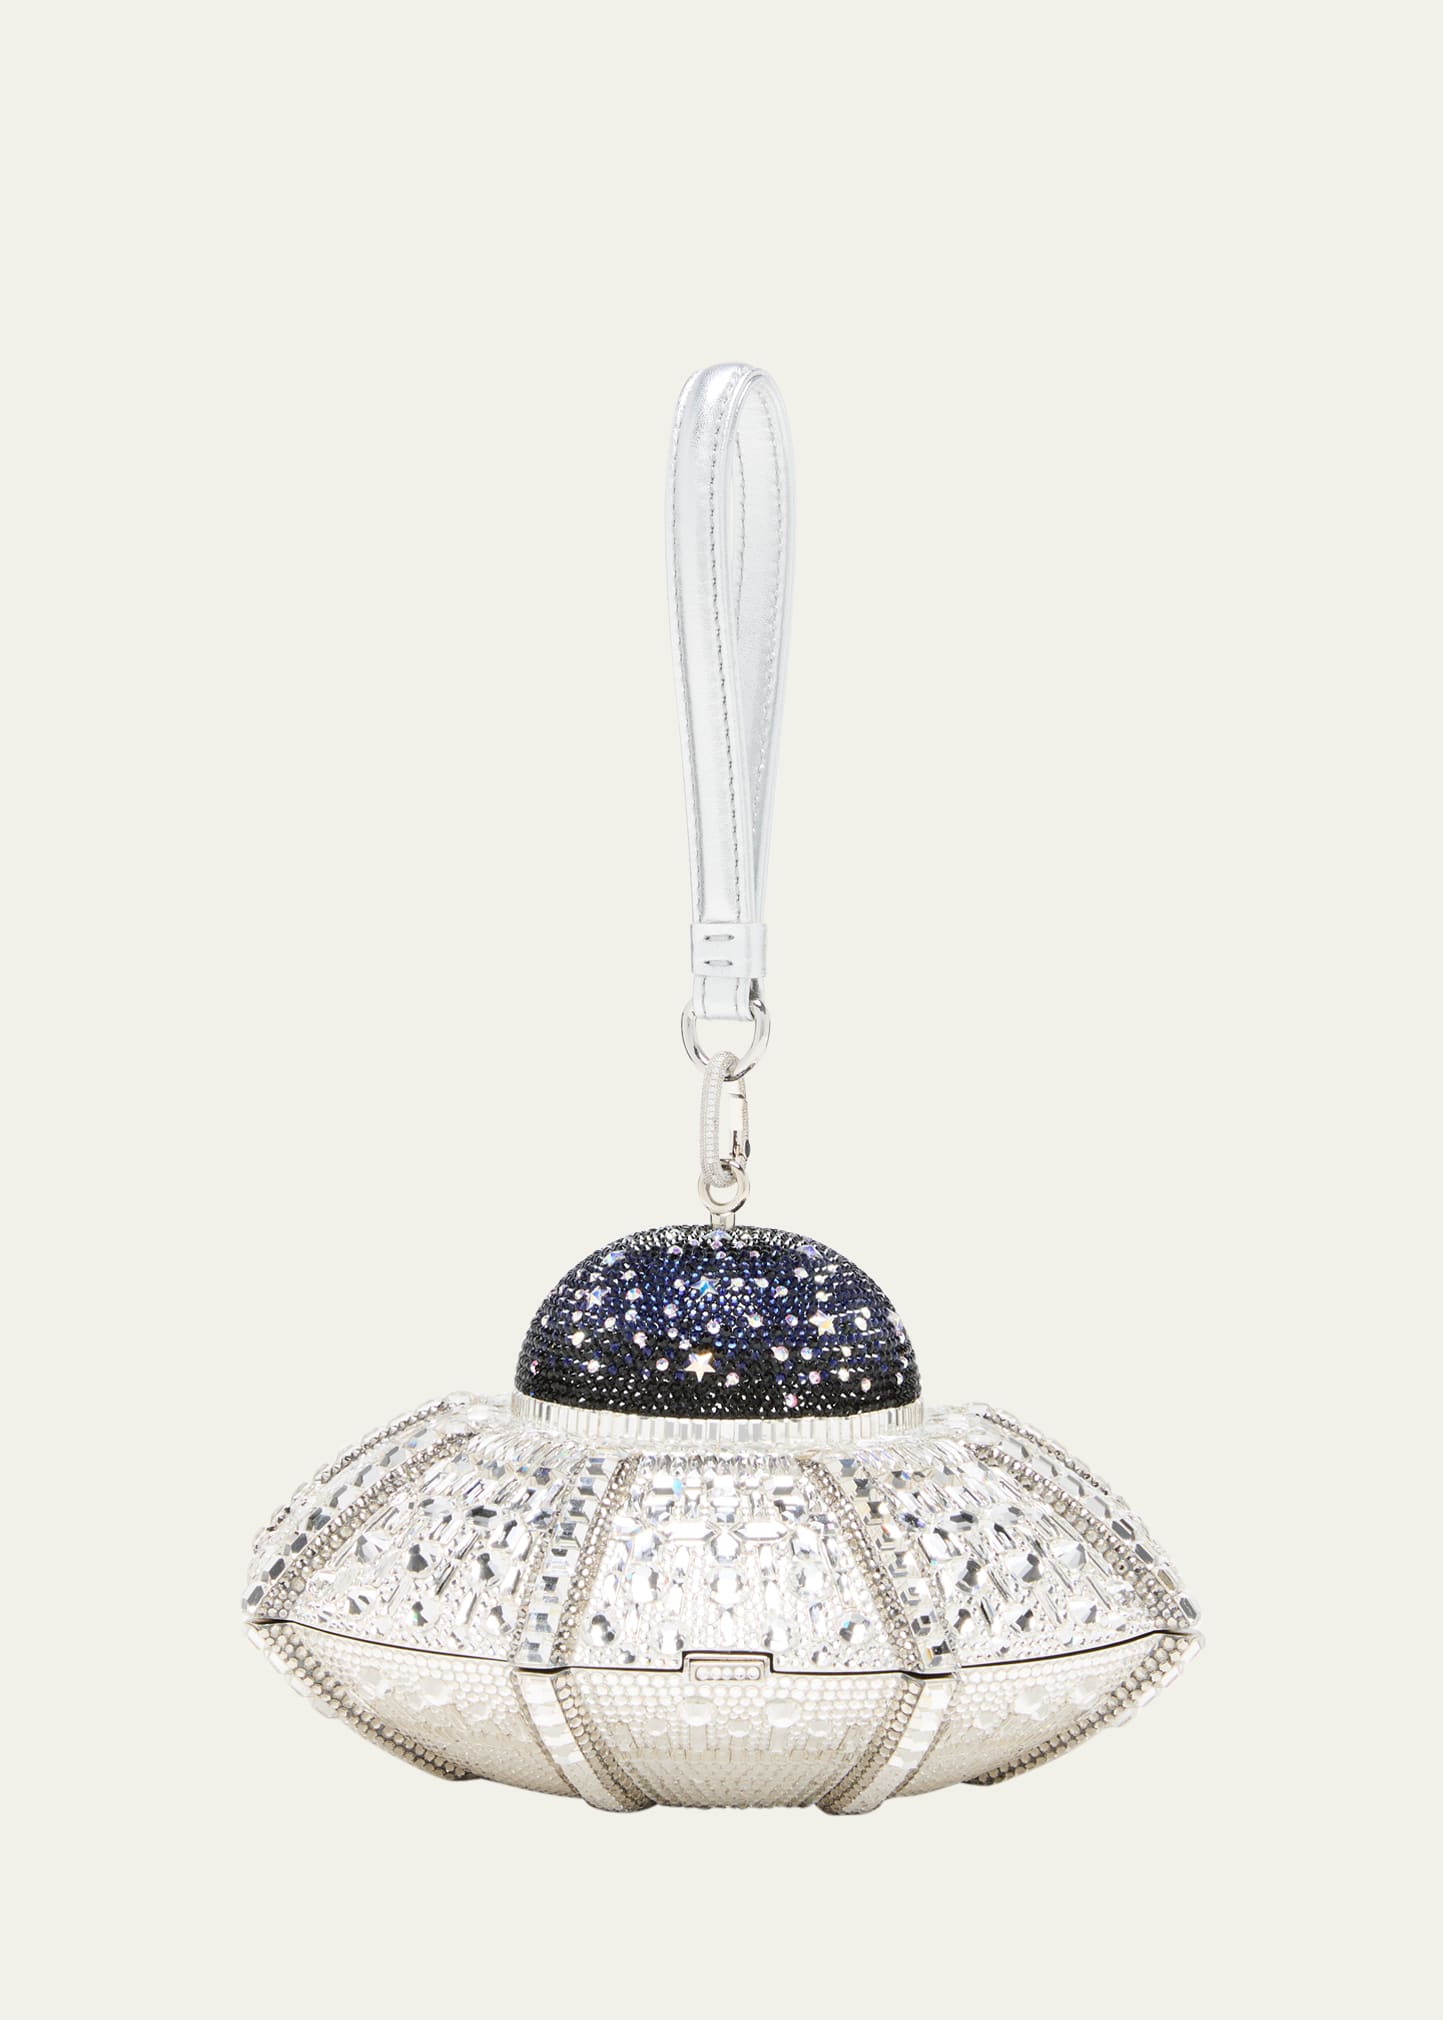 Judith Leiber Ufo Orbiter Clutch Bag With Removable Wristlet Strap In Silver